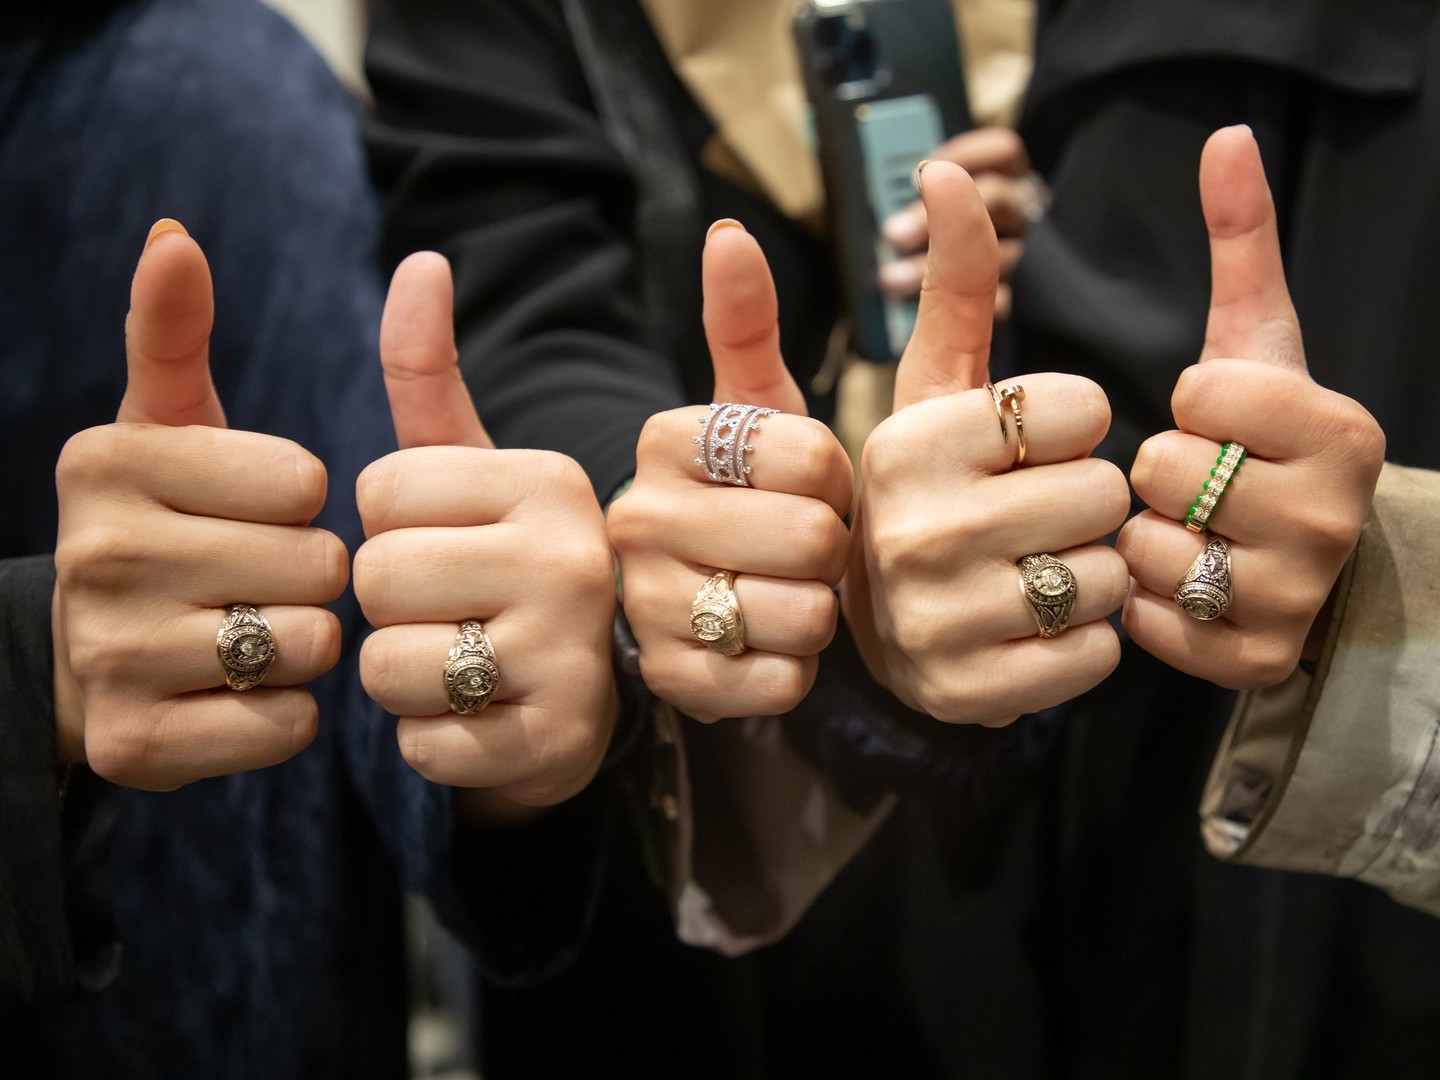 Texas A&M at Qatar on X: Congratulations to the 61 Aggies who just  received their Aggie Rings! Receiving an Aggie Ring is one of the greatest  moments during an Aggie's time at